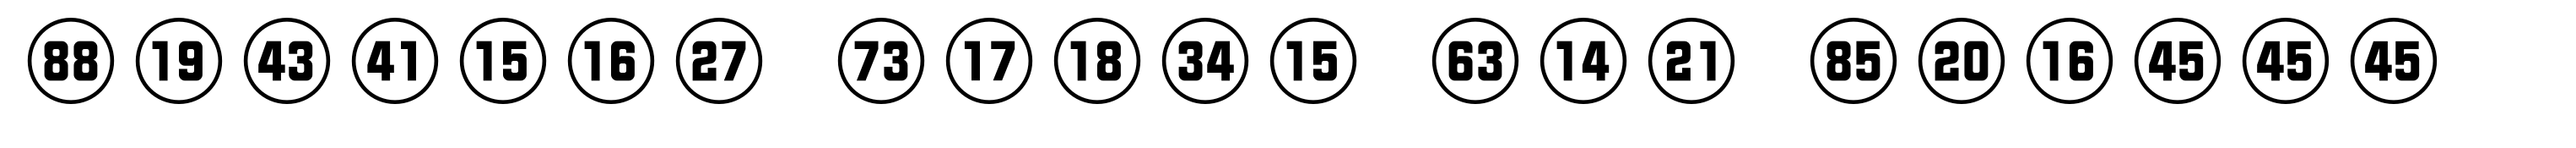 Numbers Style Two Circle Positive